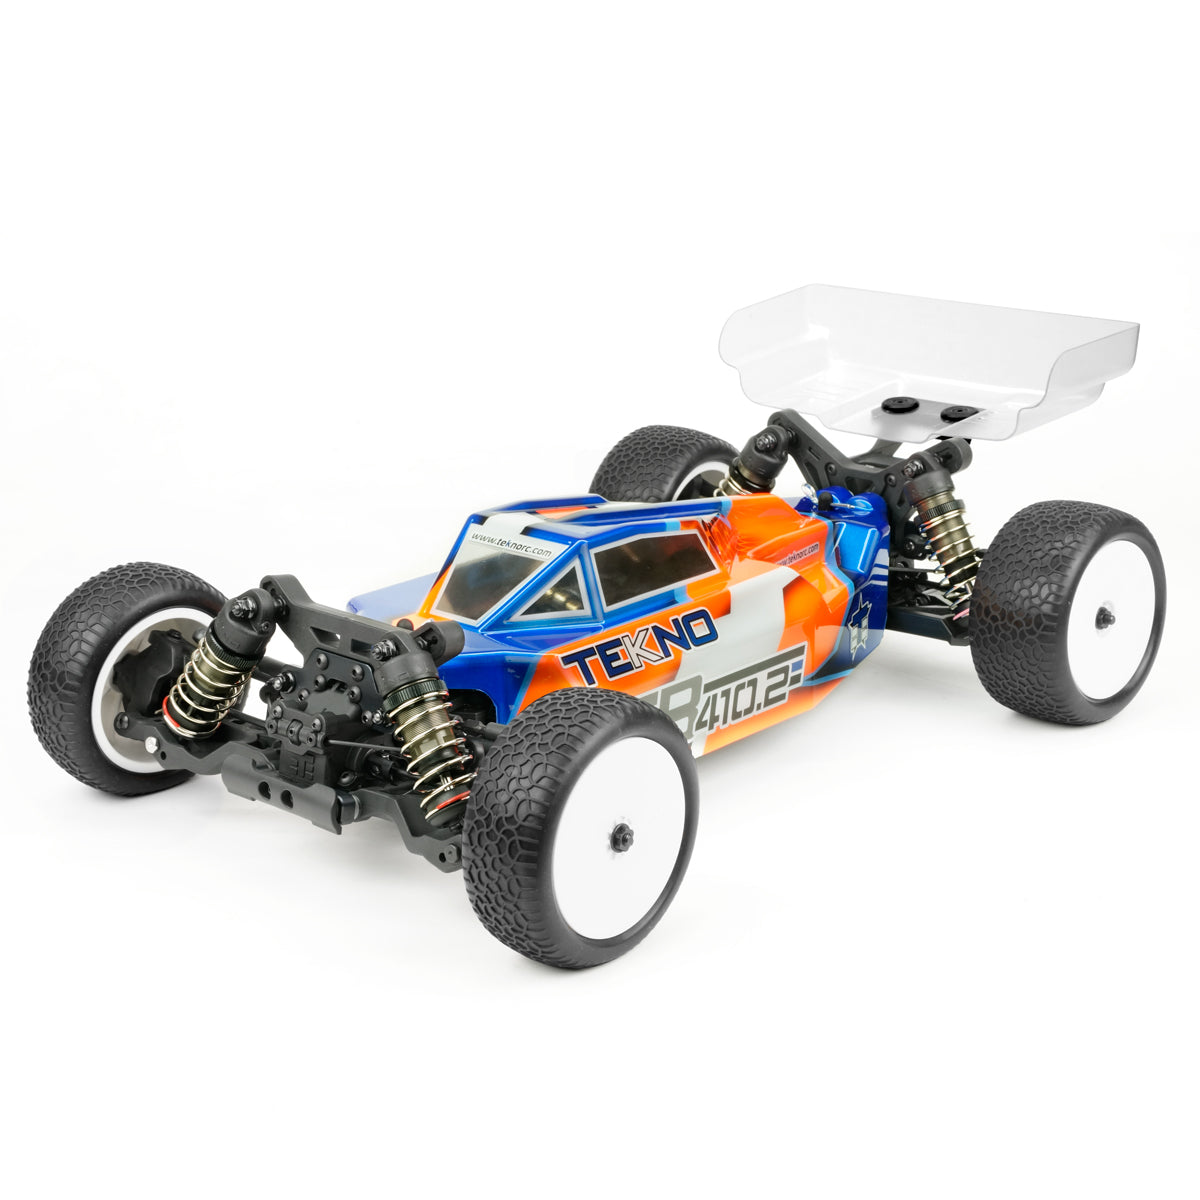 TKR6502 EB410.2 1/10th 4WD Competition Electric Buggy Kit